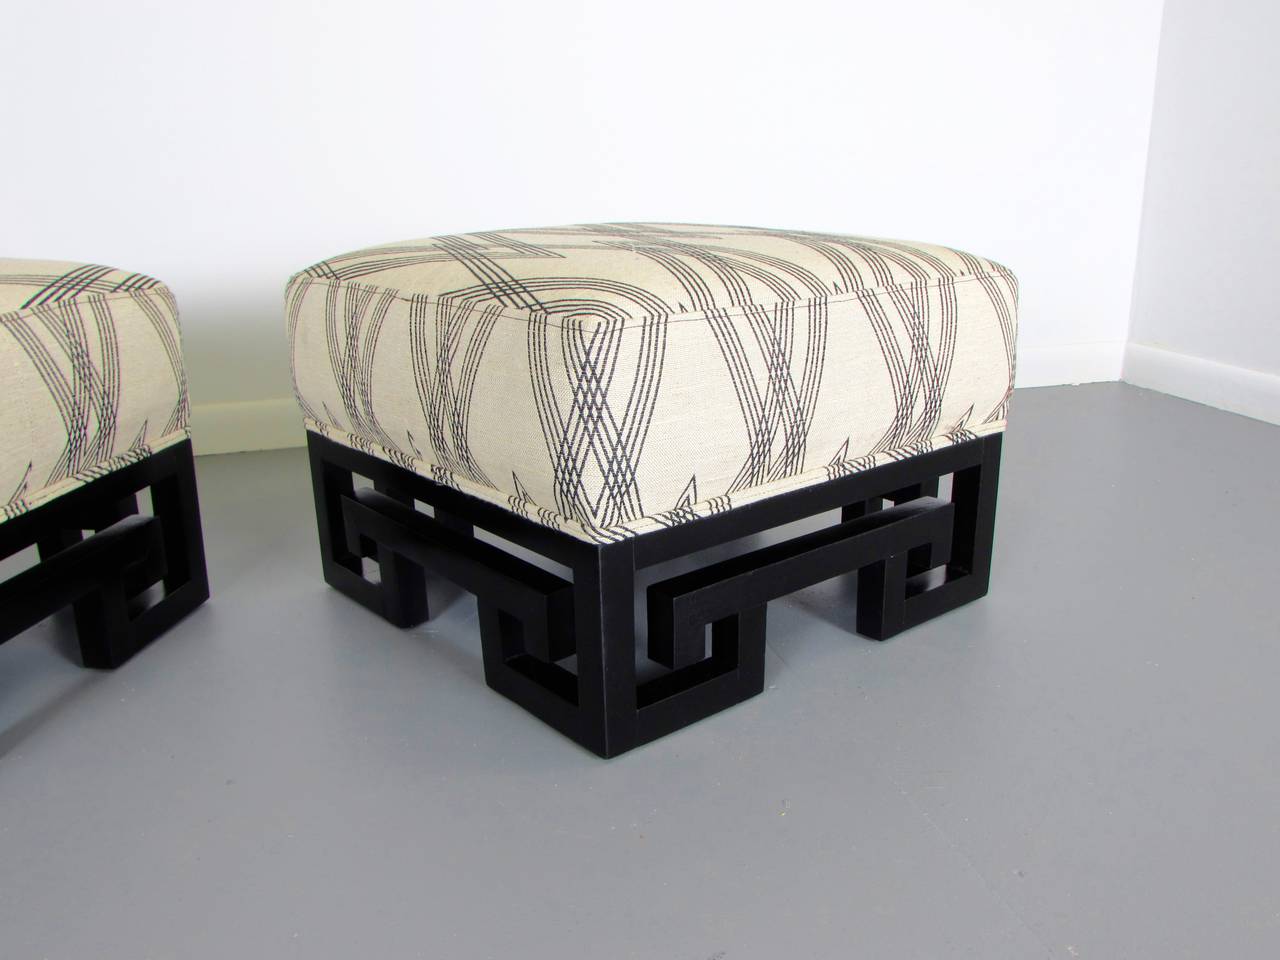 Hollywood Regency Incredible Ottomans or Stools with Lacquered Greek Key Bases after James Mont